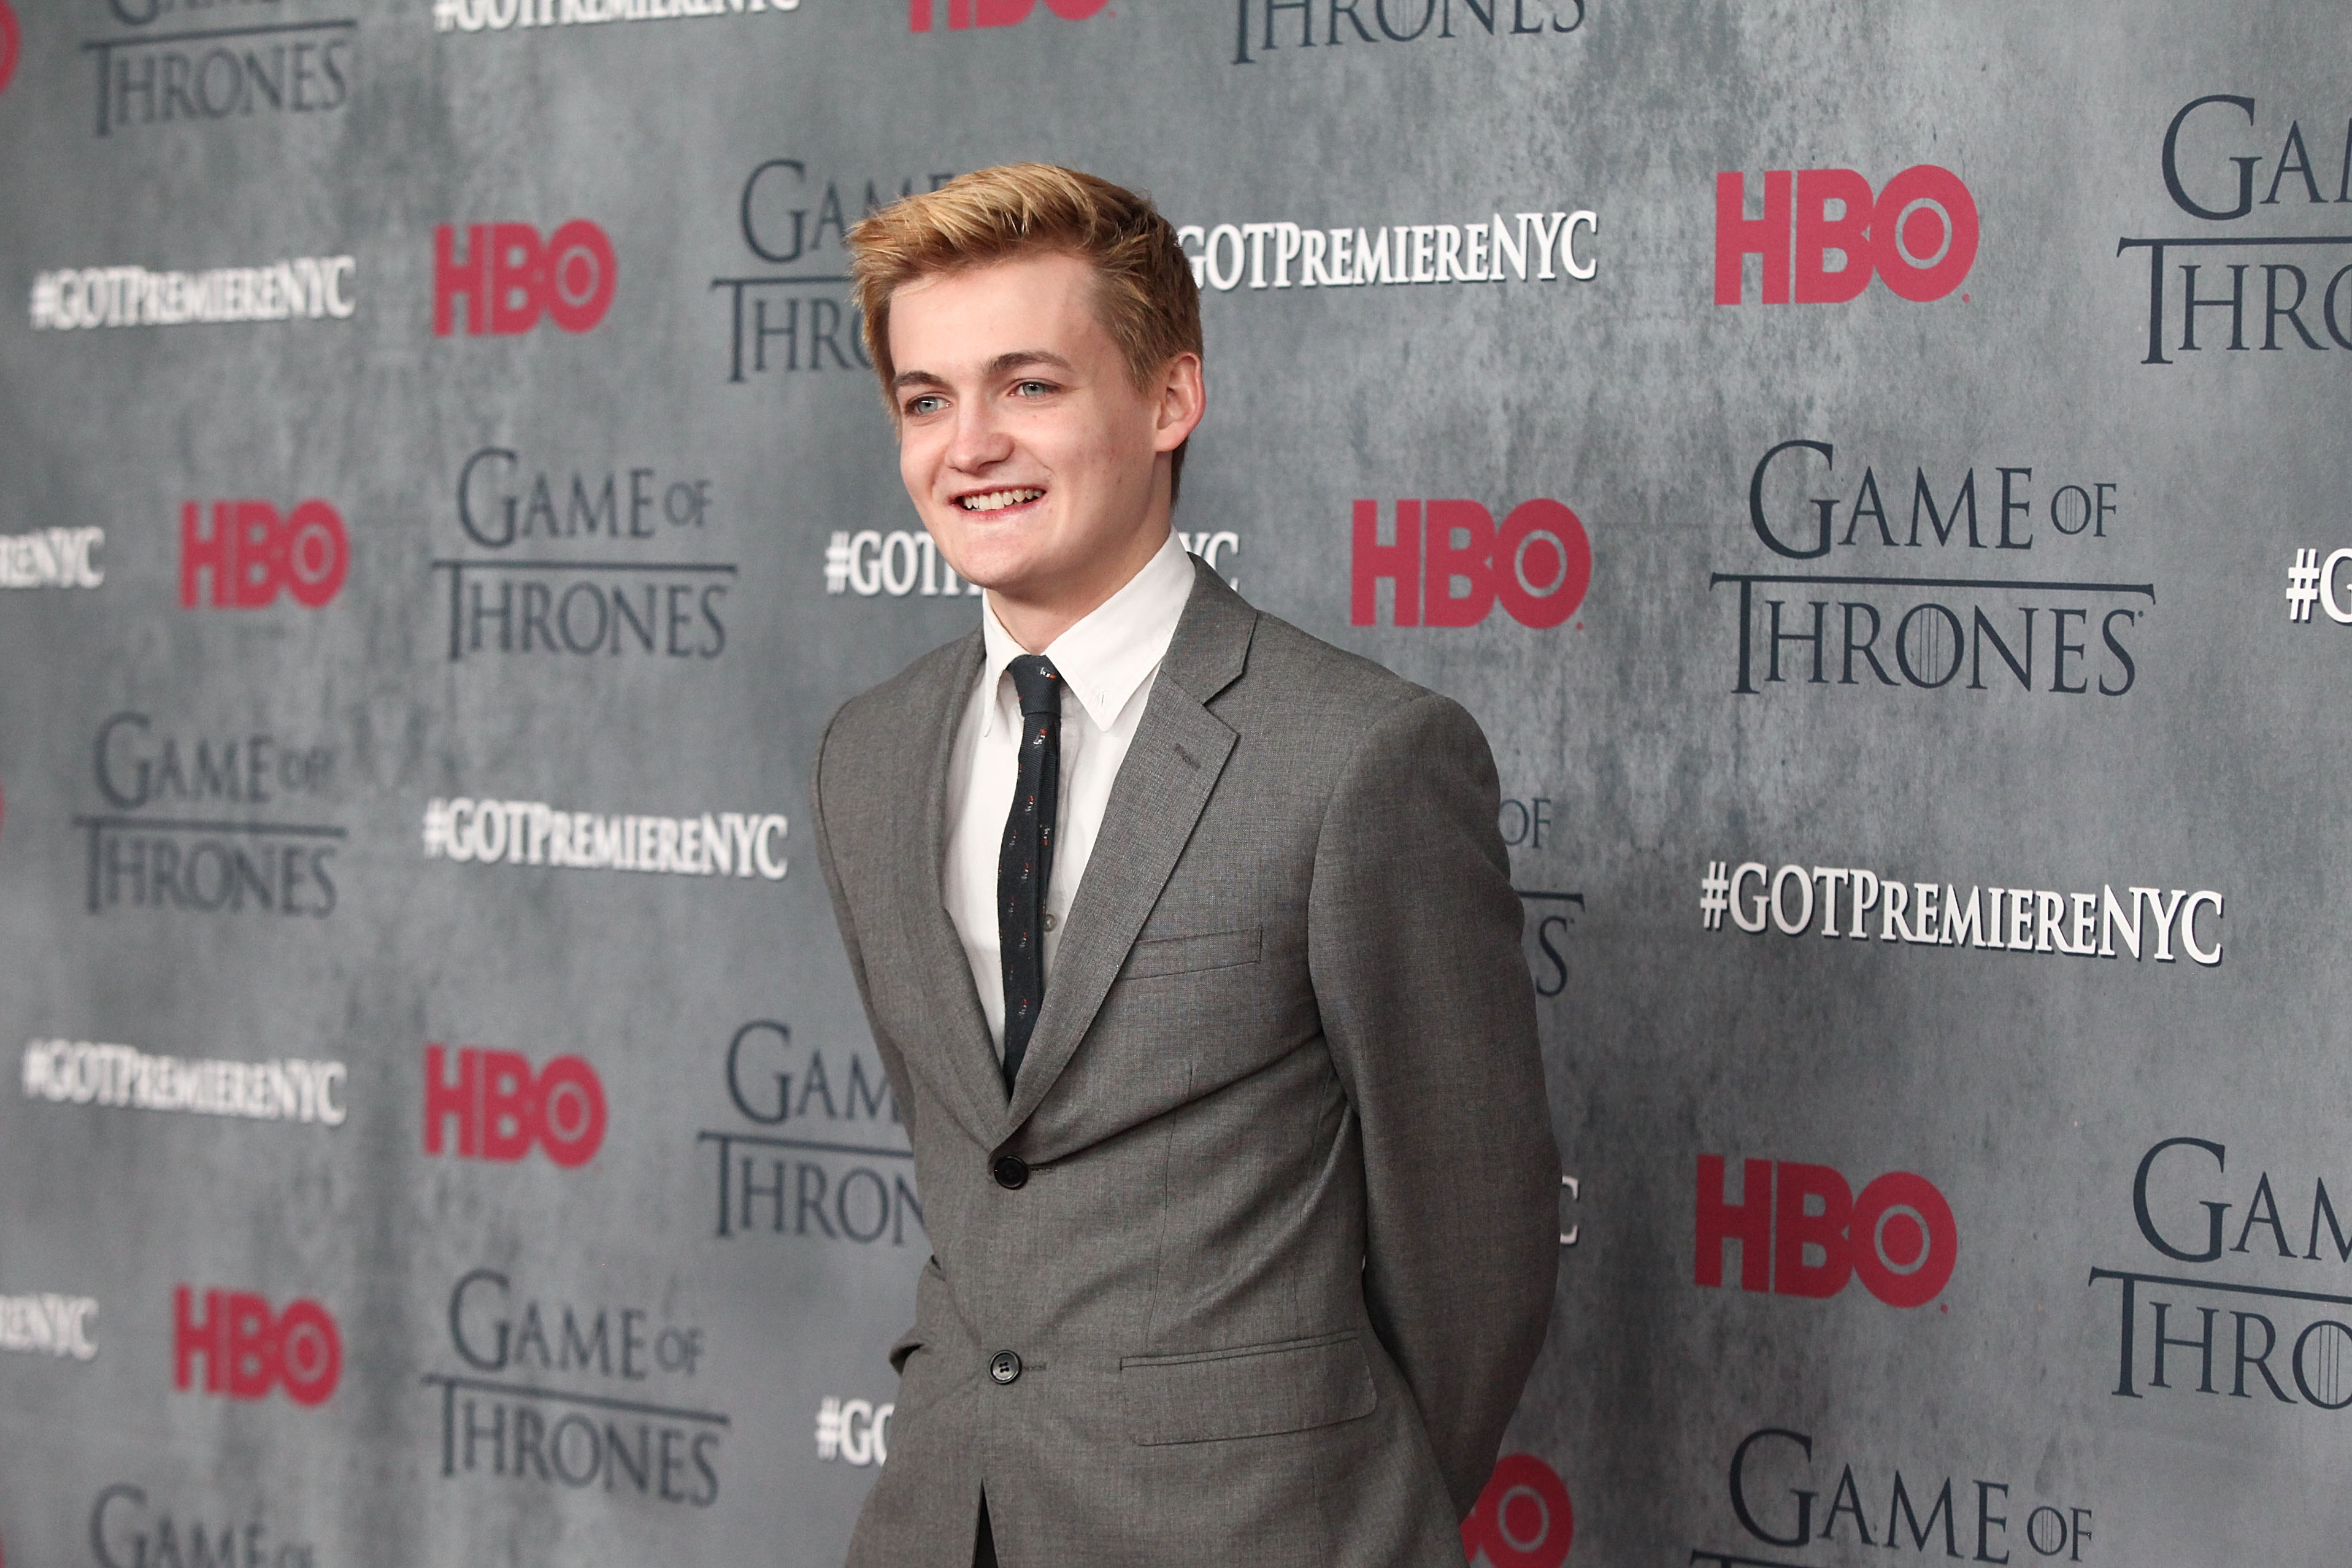 Actor Jack Gleeson attends the 'Game Of Thrones' Season 4 premiere at Avery Fisher Hall, Lincoln Center on March 18, 2014 in New York City (Taylor Hill—FilmMagic/Getty Images)